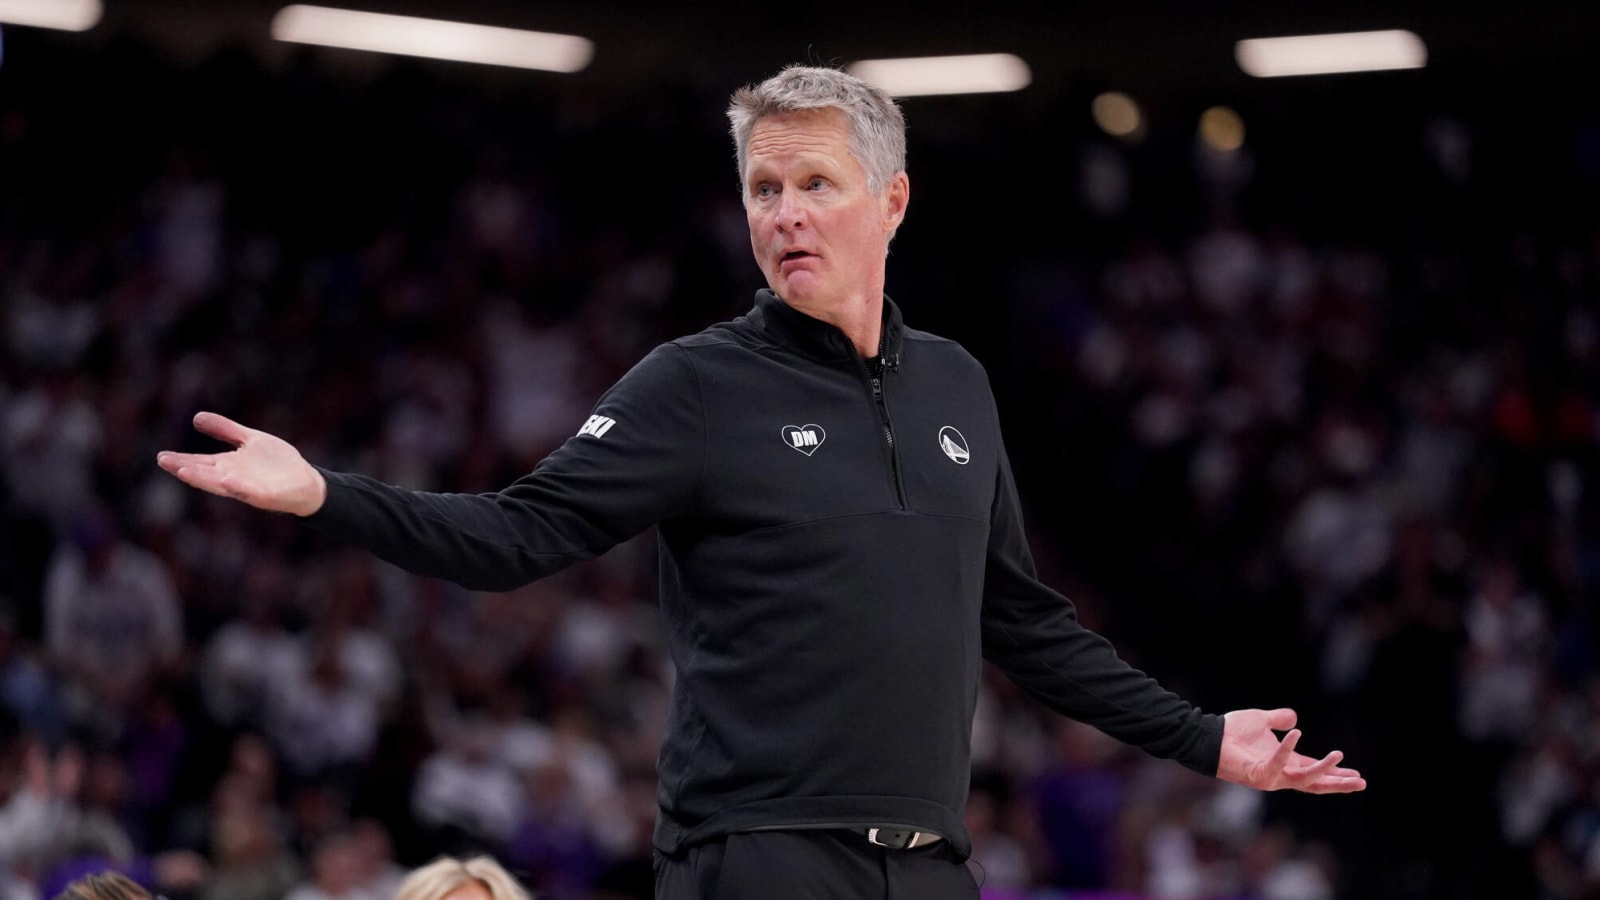 Golden State Warriors: Steve Kerr’s Heartbreaking Reaction to Play-In Loss Vs. Kings Hints at End of Era